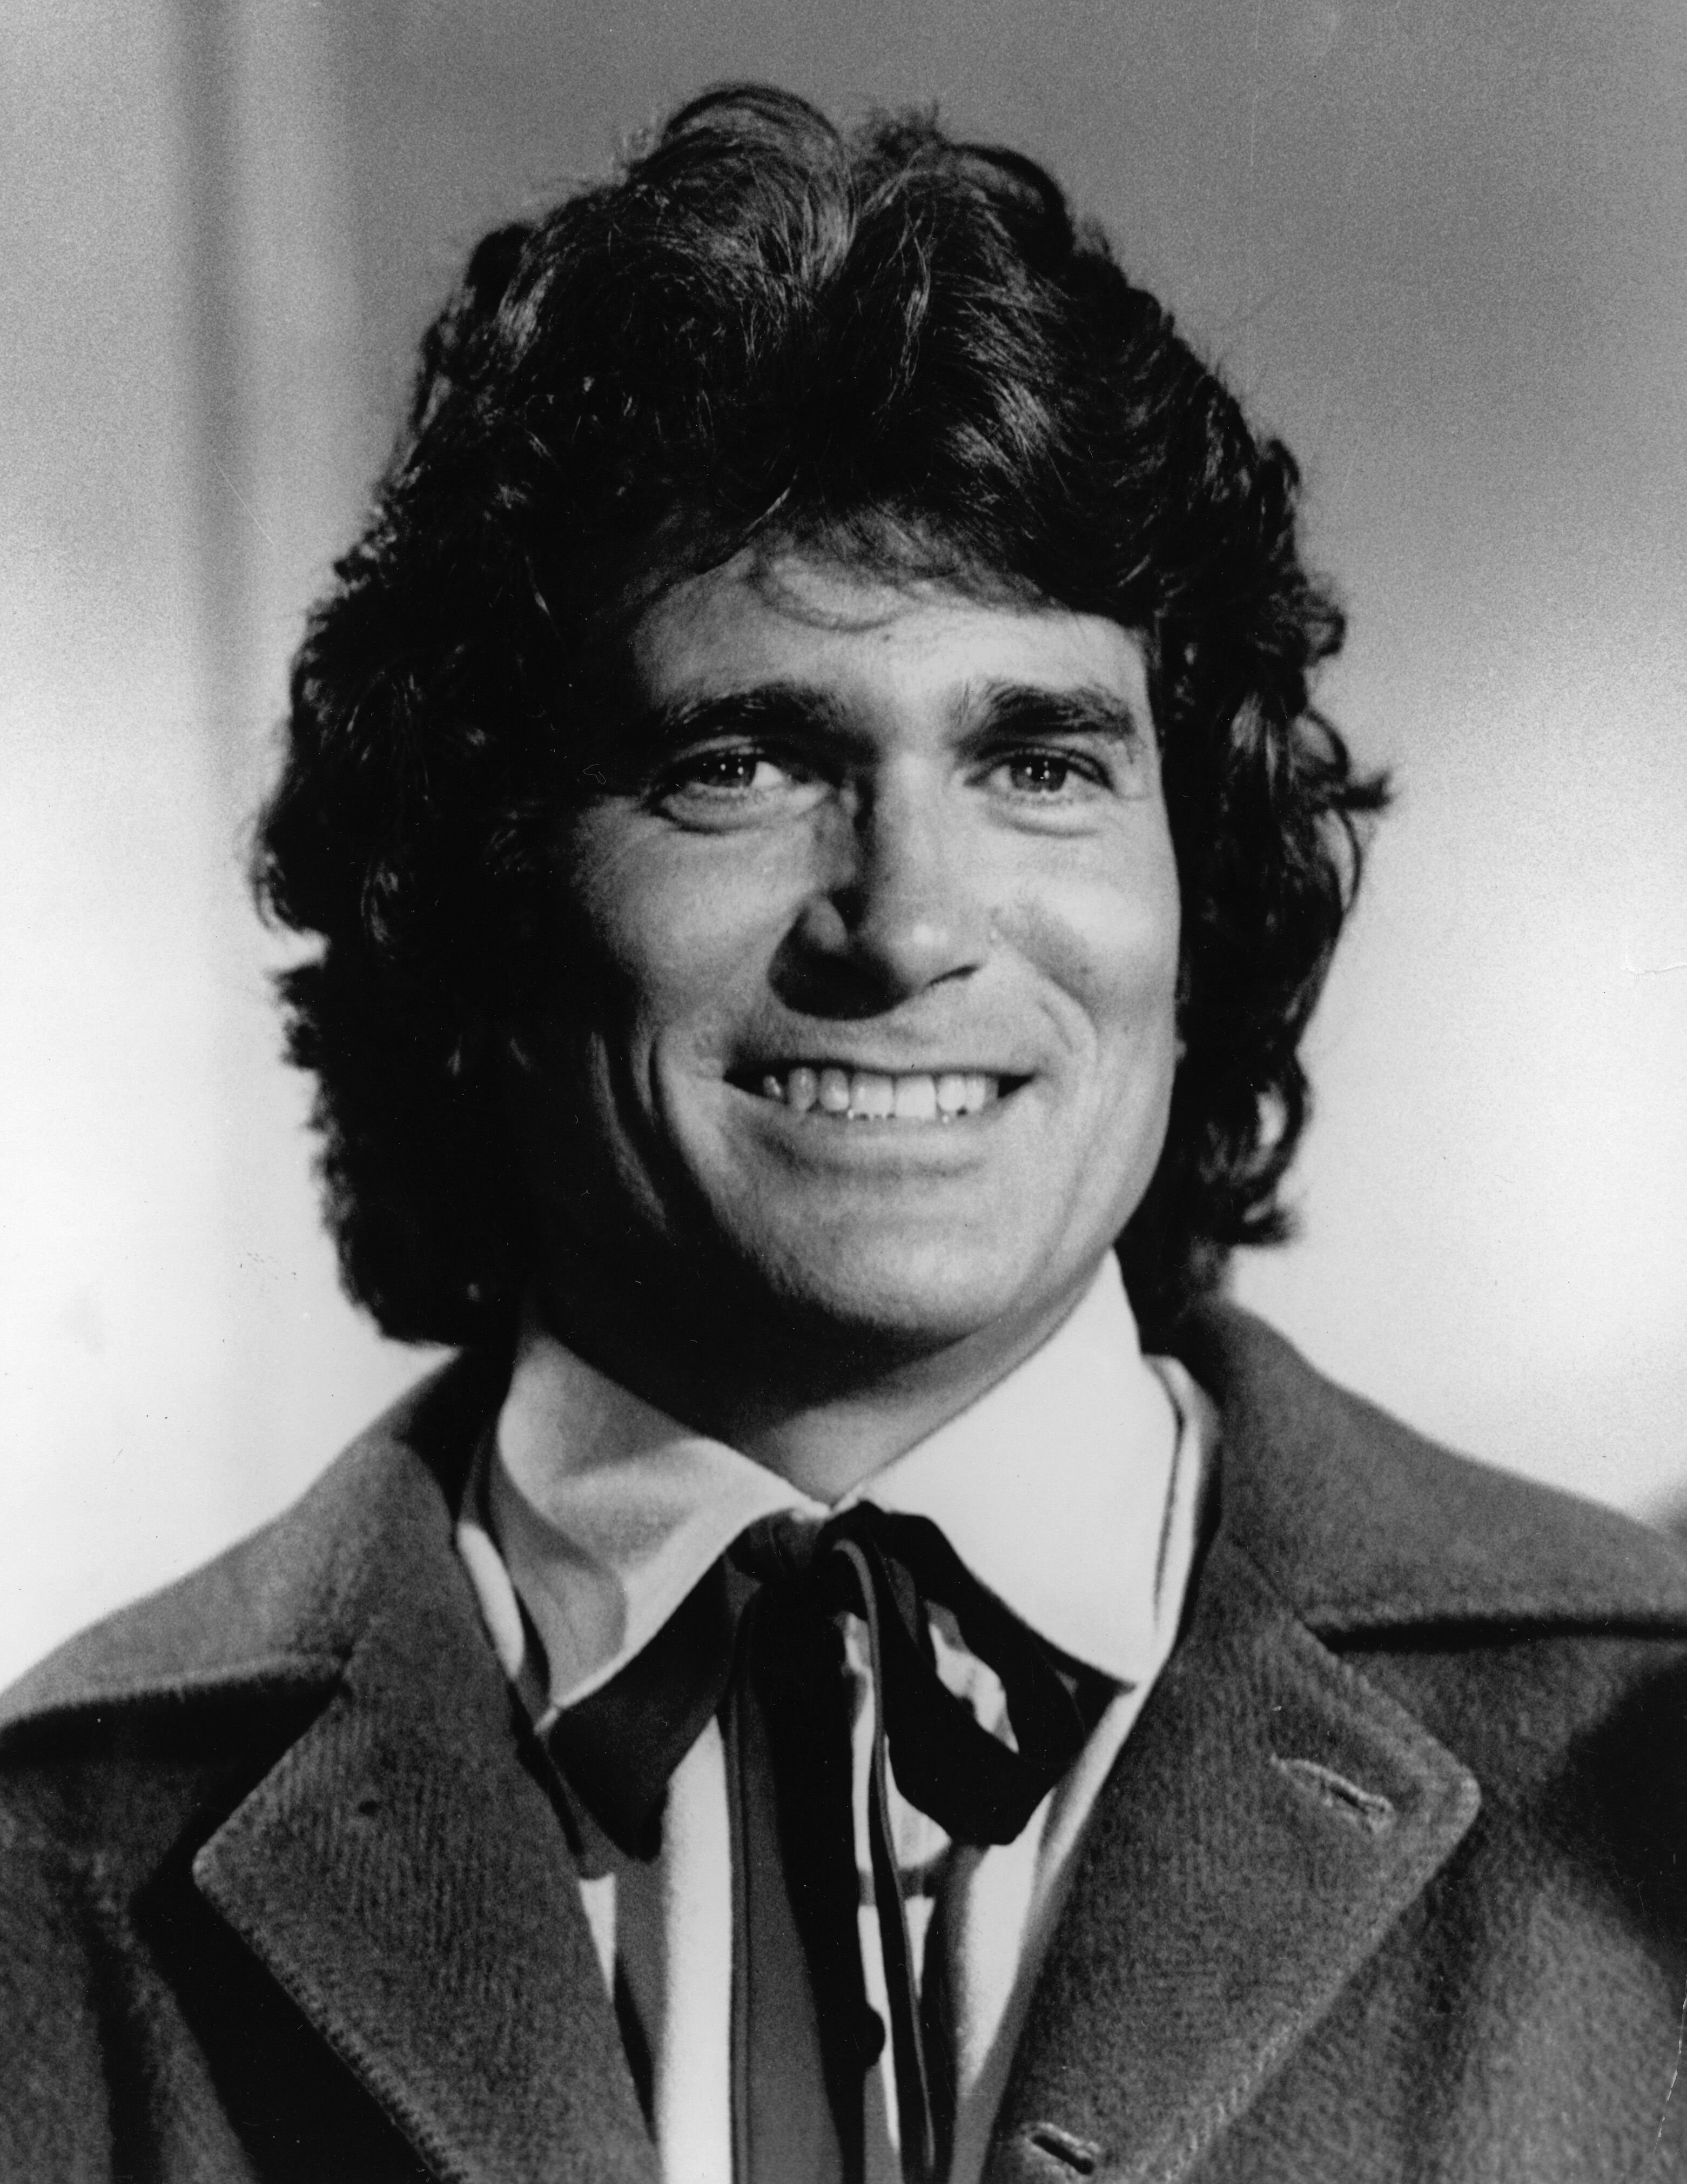 Headshot of American actor Michael Landon (1936 - 1991) smiling in costume from the television series, "The Little House On The Prairie." | Getty Images